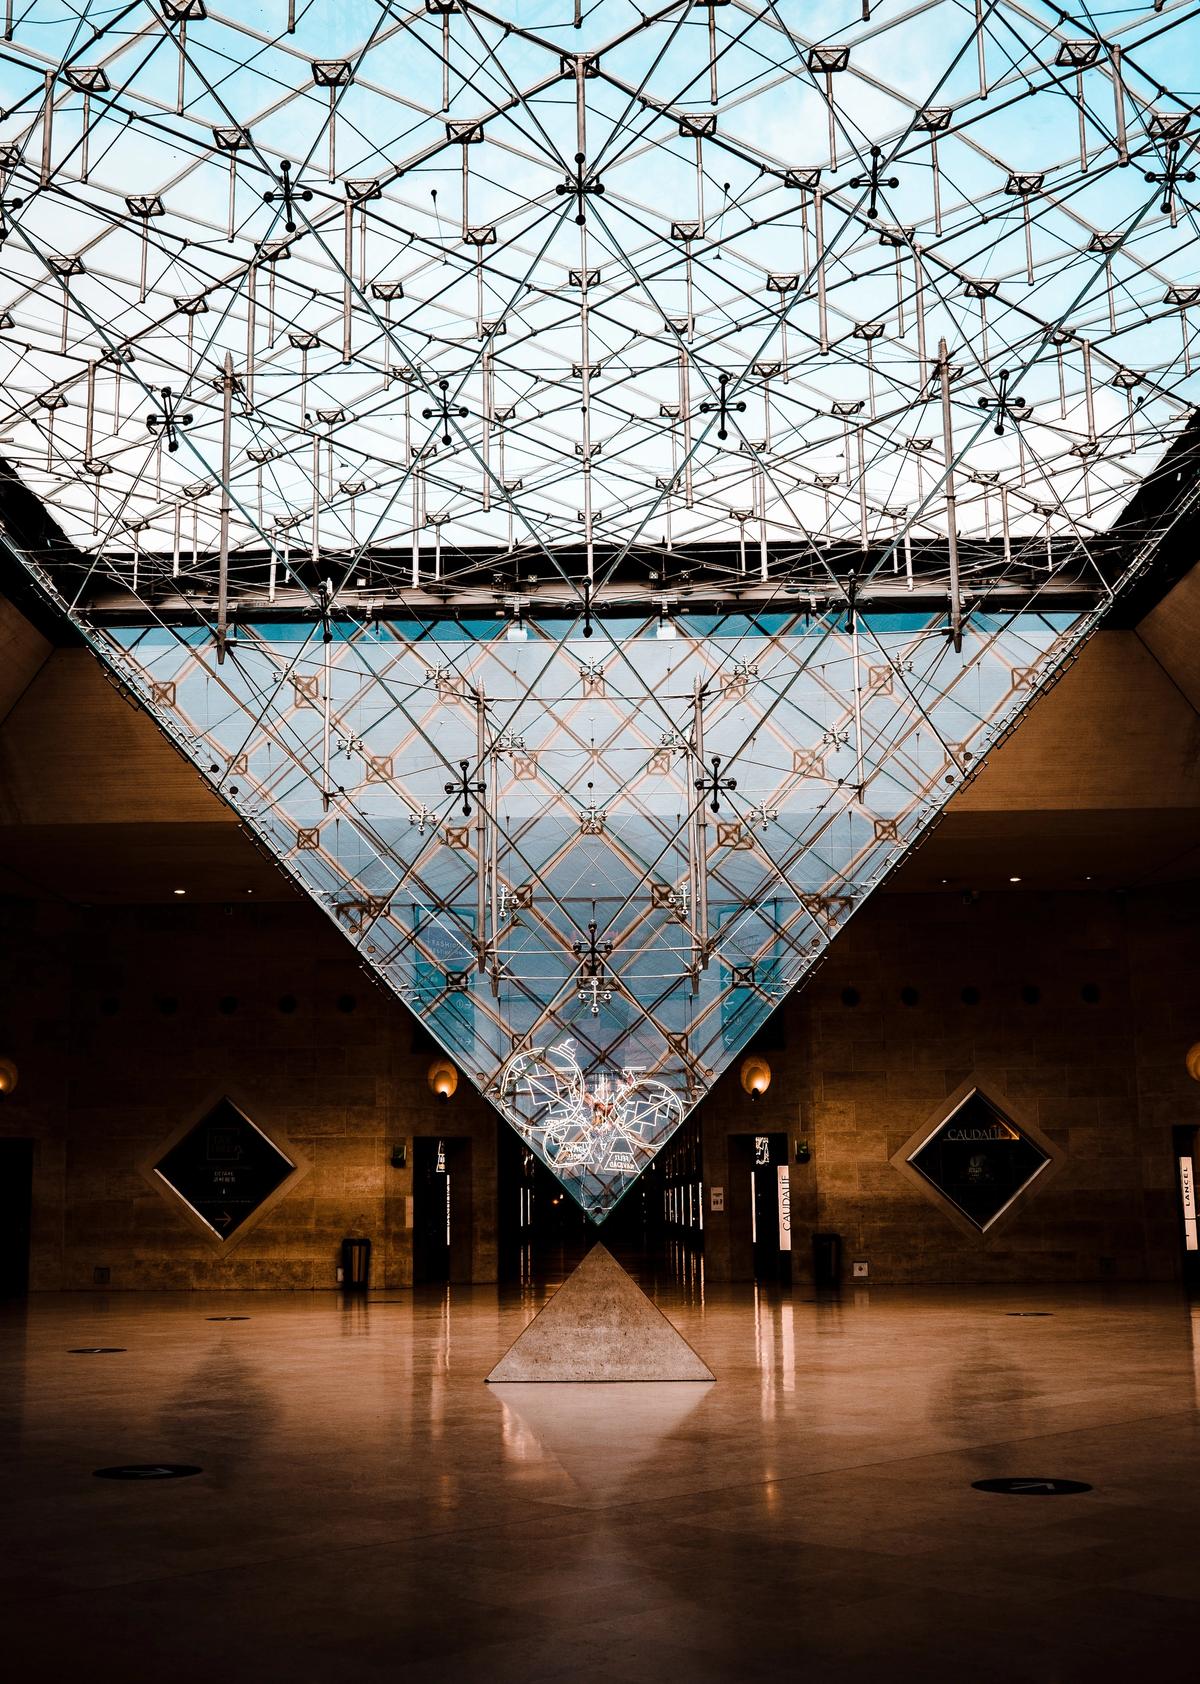 The Louvre has made efforts to investigate the provenance of its collection in recent years

Photo: Hugo Delauney